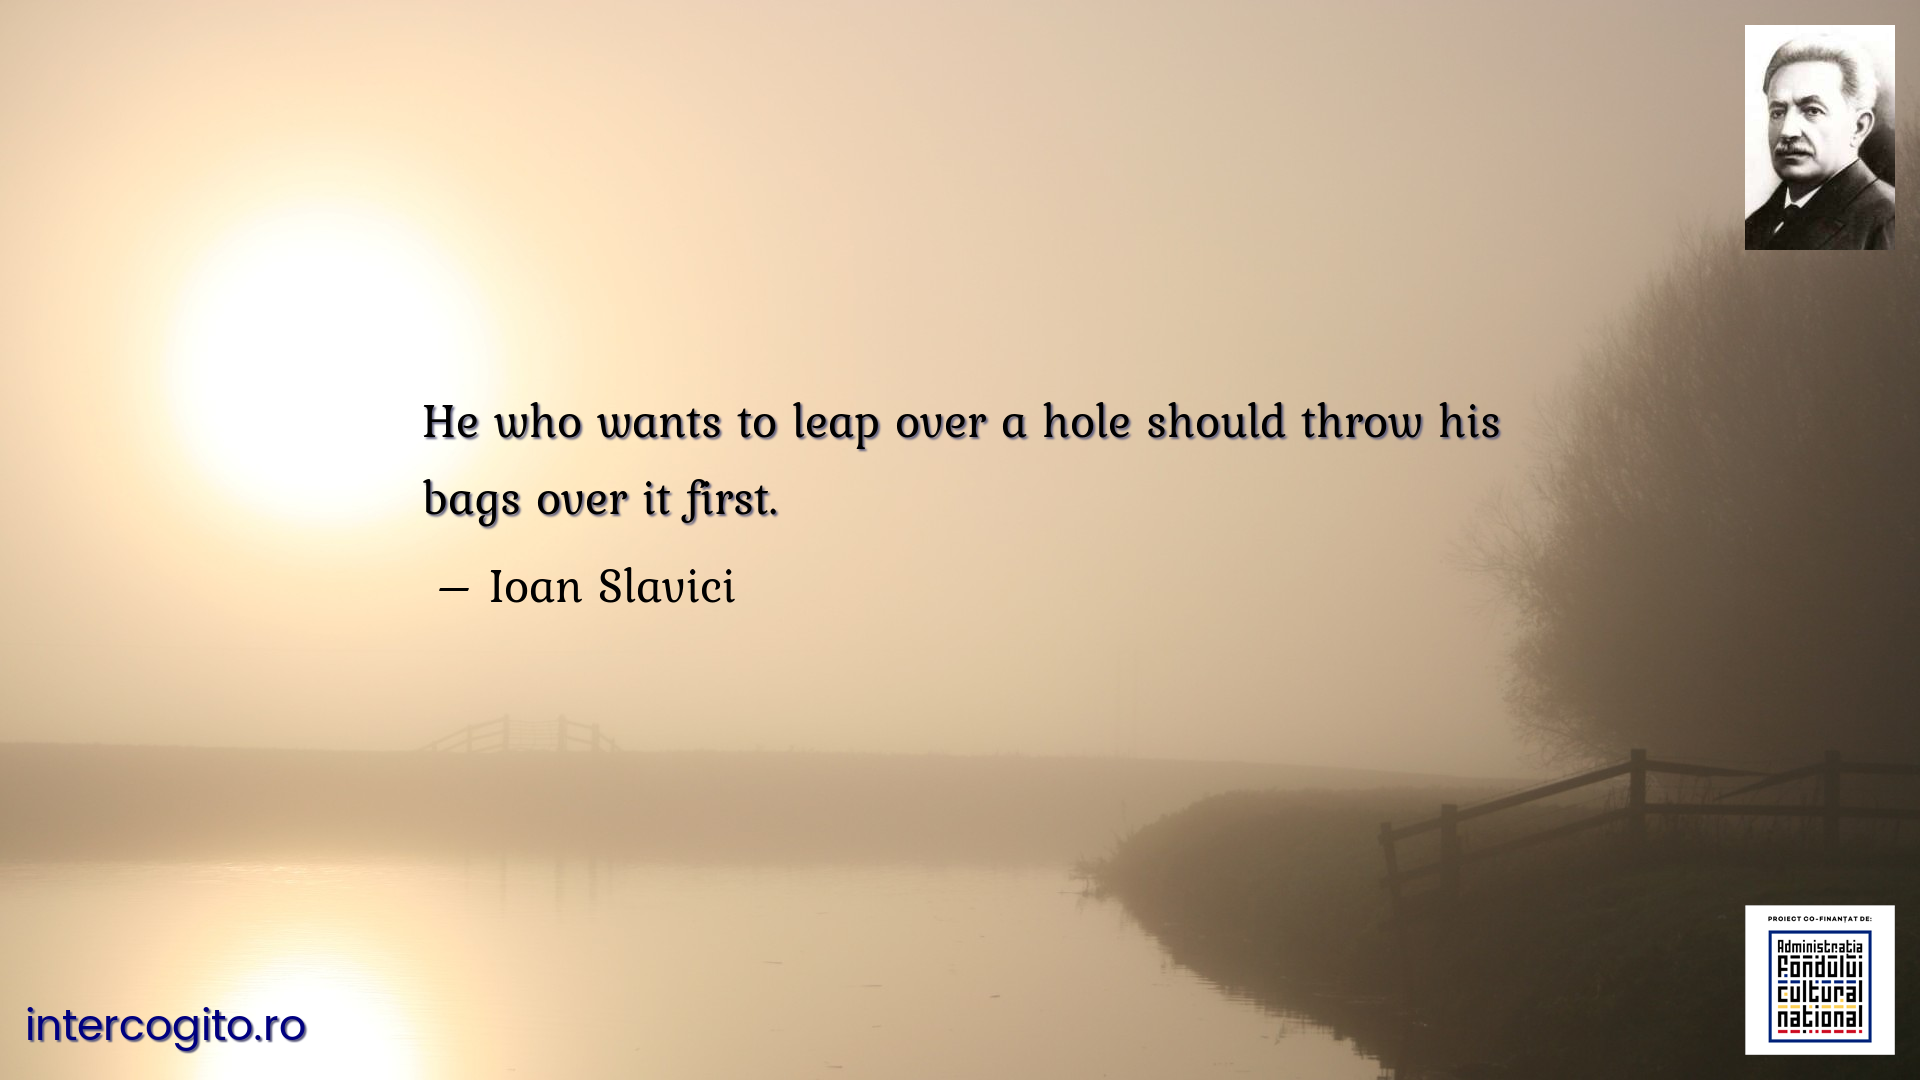 He who wants to leap over a hole should throw his bags over it first.